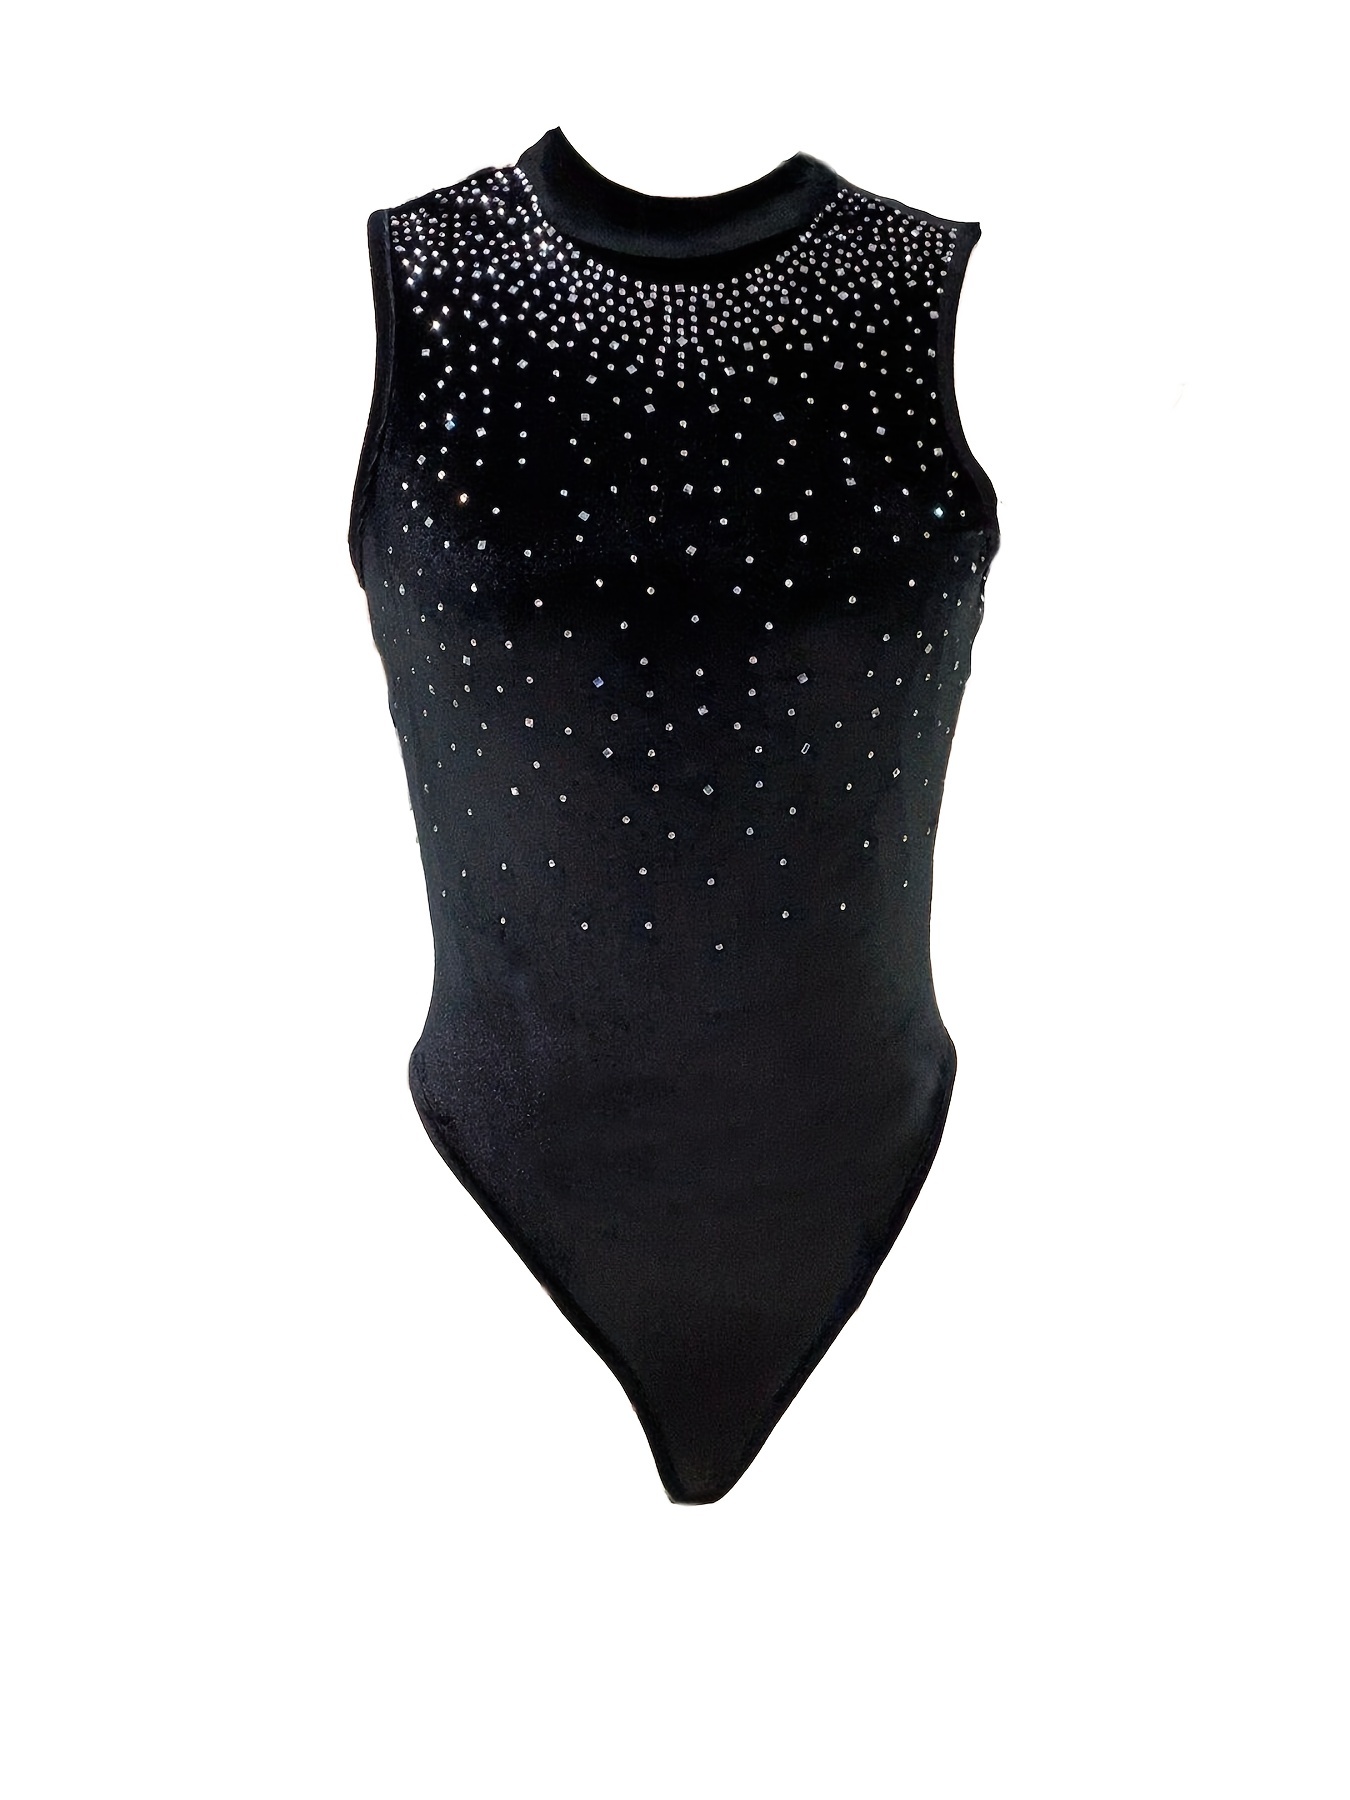 Dropship Rhinestone Crew Neck Bodysuit, Casual Sleeveless Slim Bodysuit,  Women's Clothing to Sell Online at a Lower Price